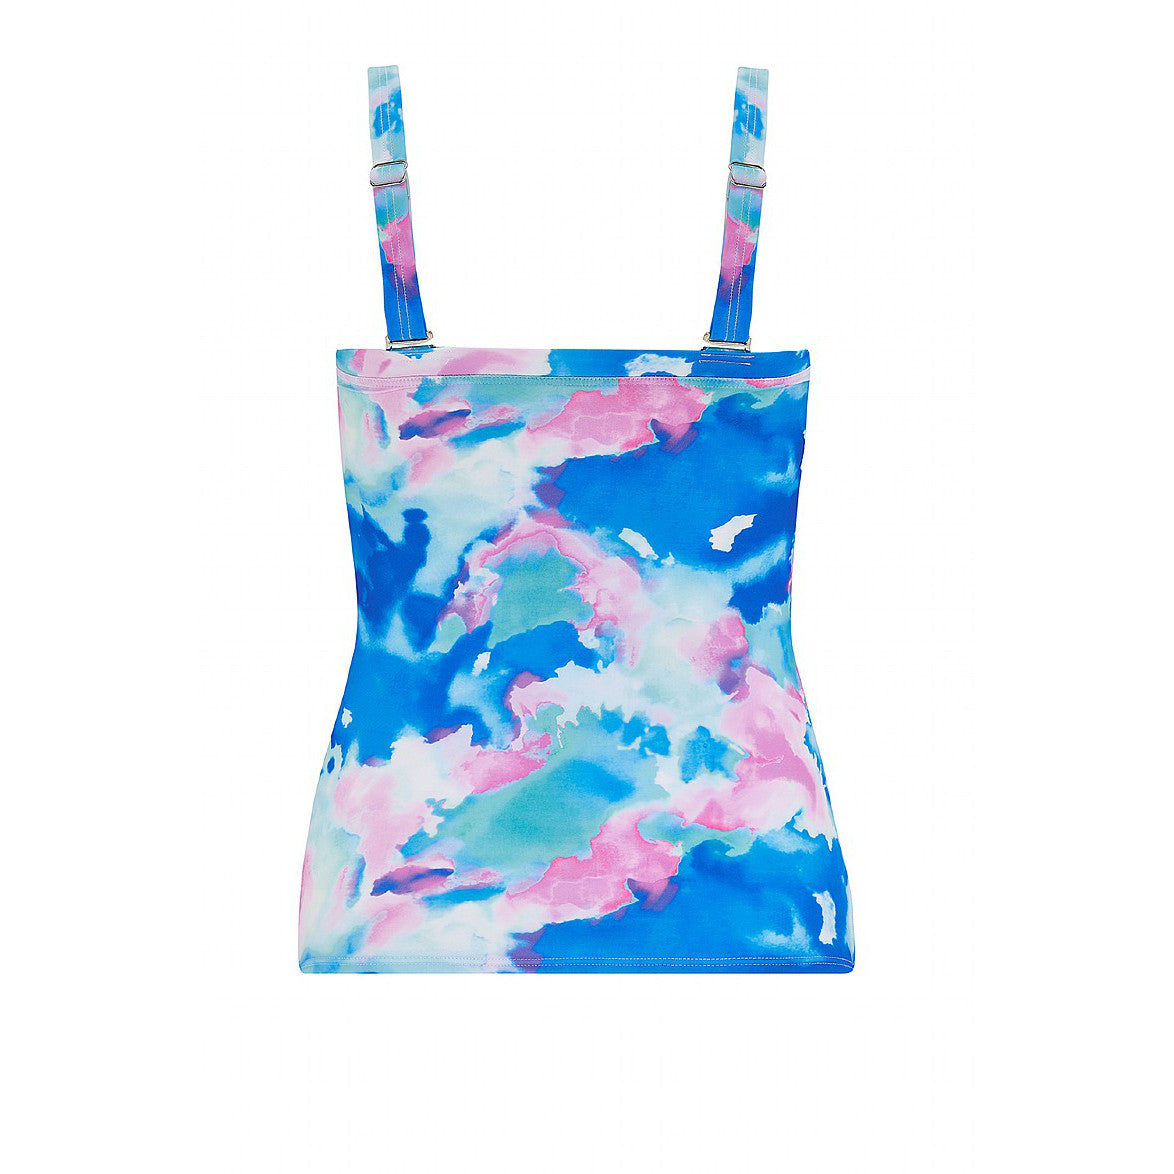 Casablanca Ruched Tankini in a beautiful tie dye print | Swimwear from Nicola Jane | Pocketed mastectomy swimwear for women touched by breast cancer